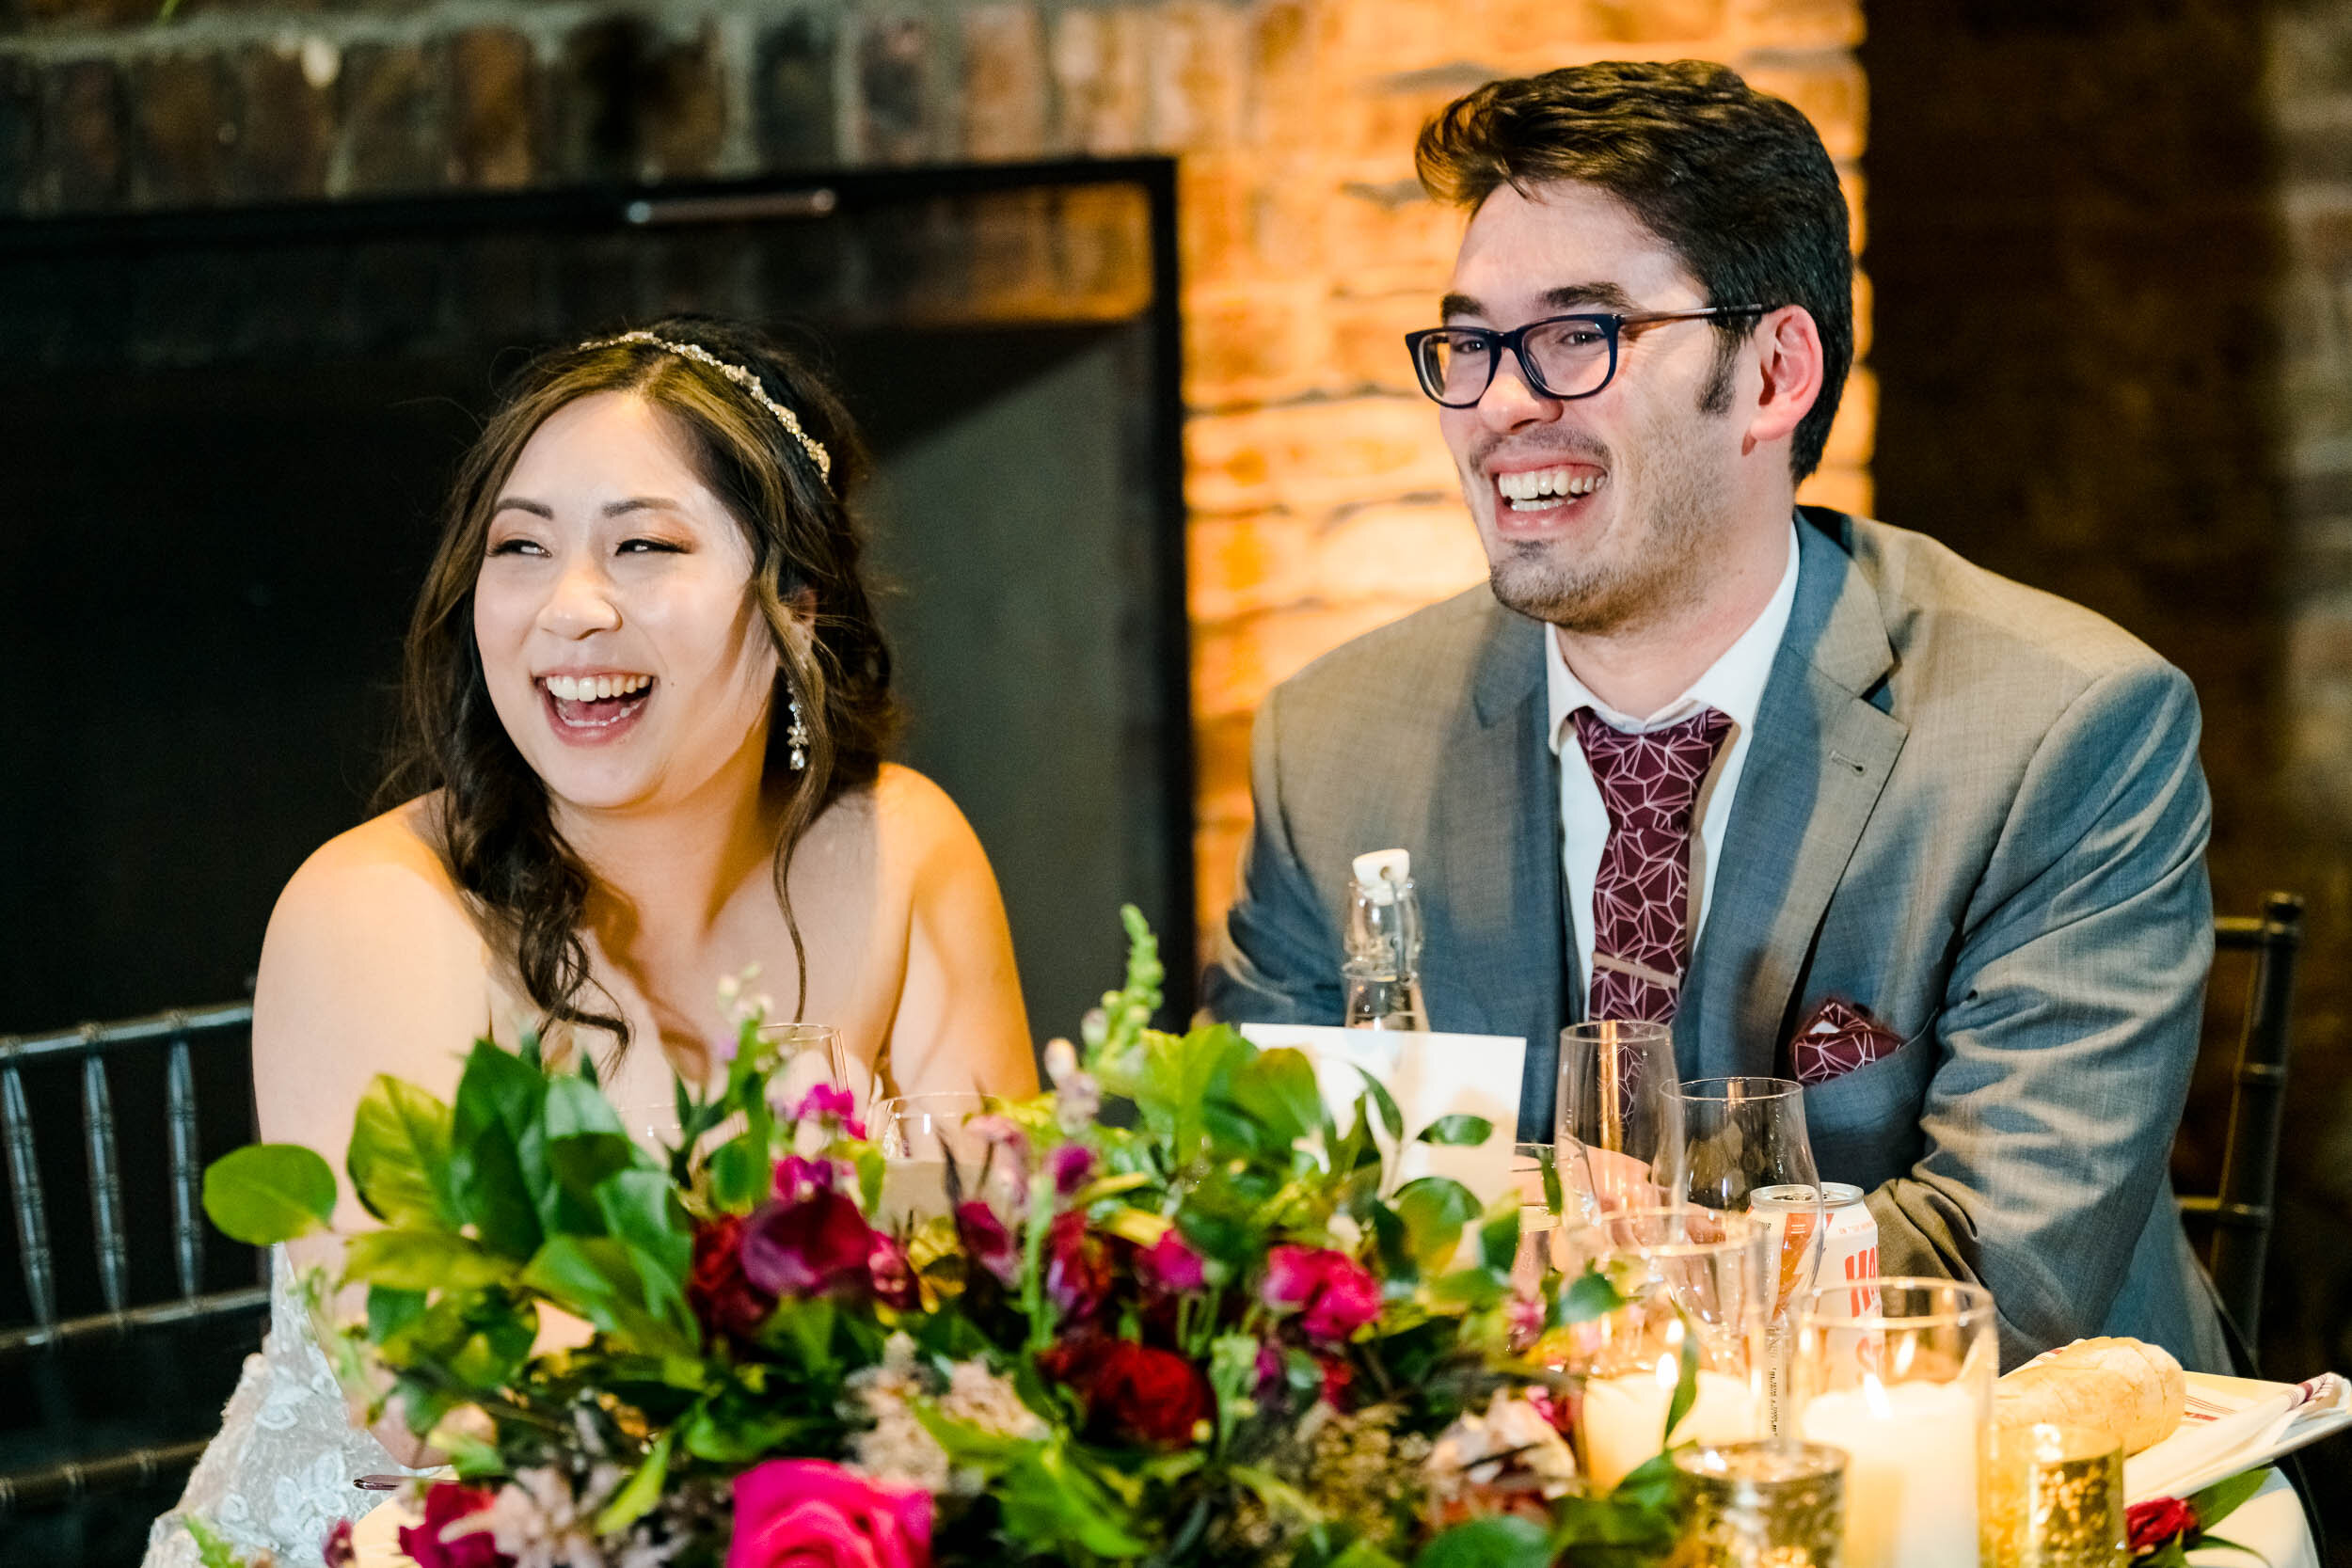 Wedding Day Photos | City Winery | J. Brown Photography | couple laughs during wedding party speeches.